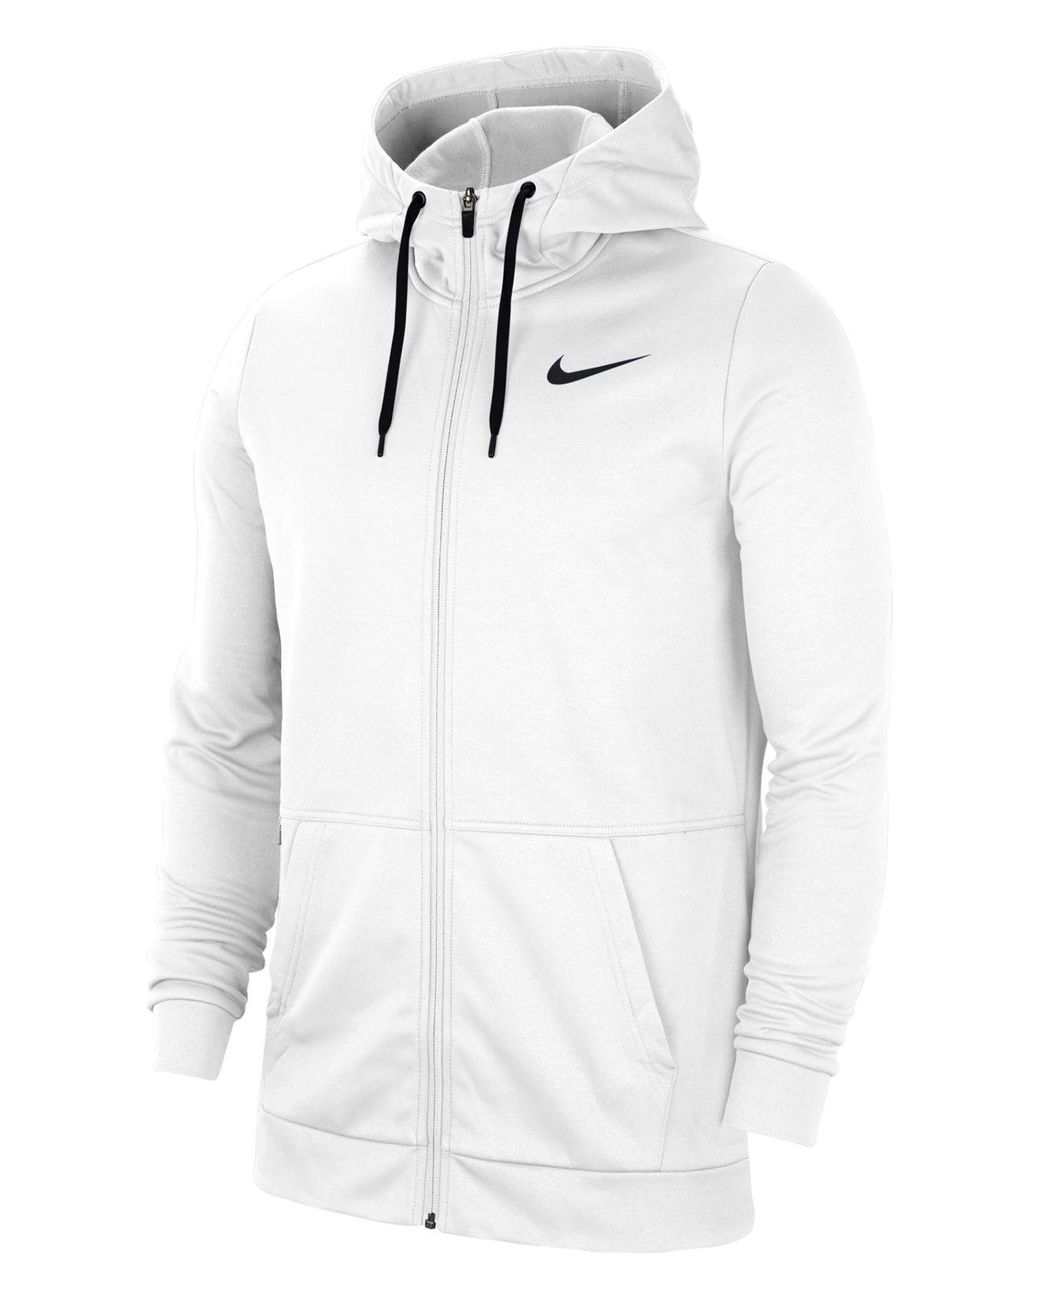 Nike Synthetic Therma Dri-fit Zip Hoodie in White for Men - Lyst